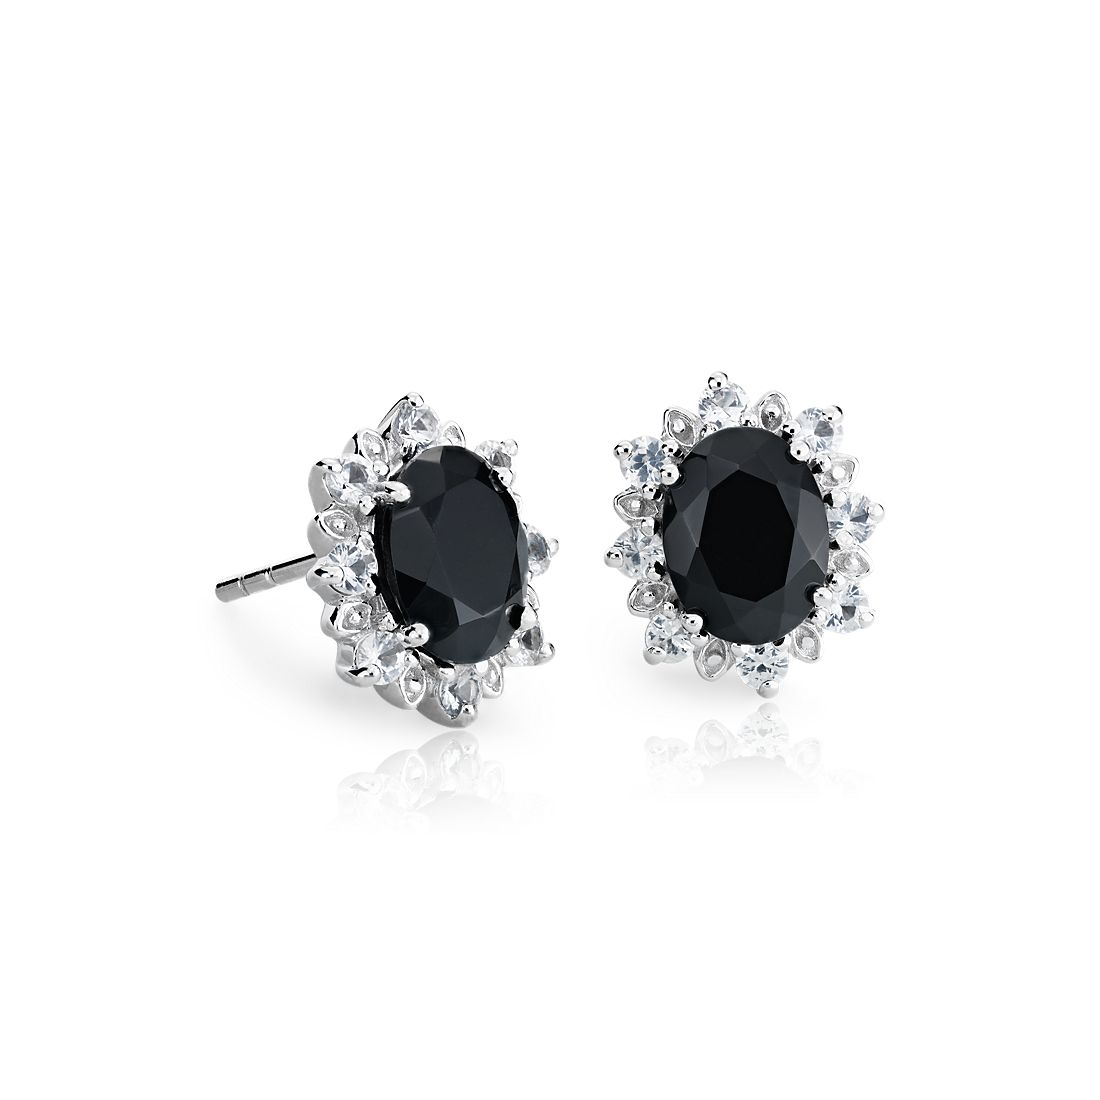 Sterling Silver,Anniversary Gift Prong Set Studs Gift For Girlfriend Black Onyx Studs Black Onyx Earring Studs Black Stone Silver Studs